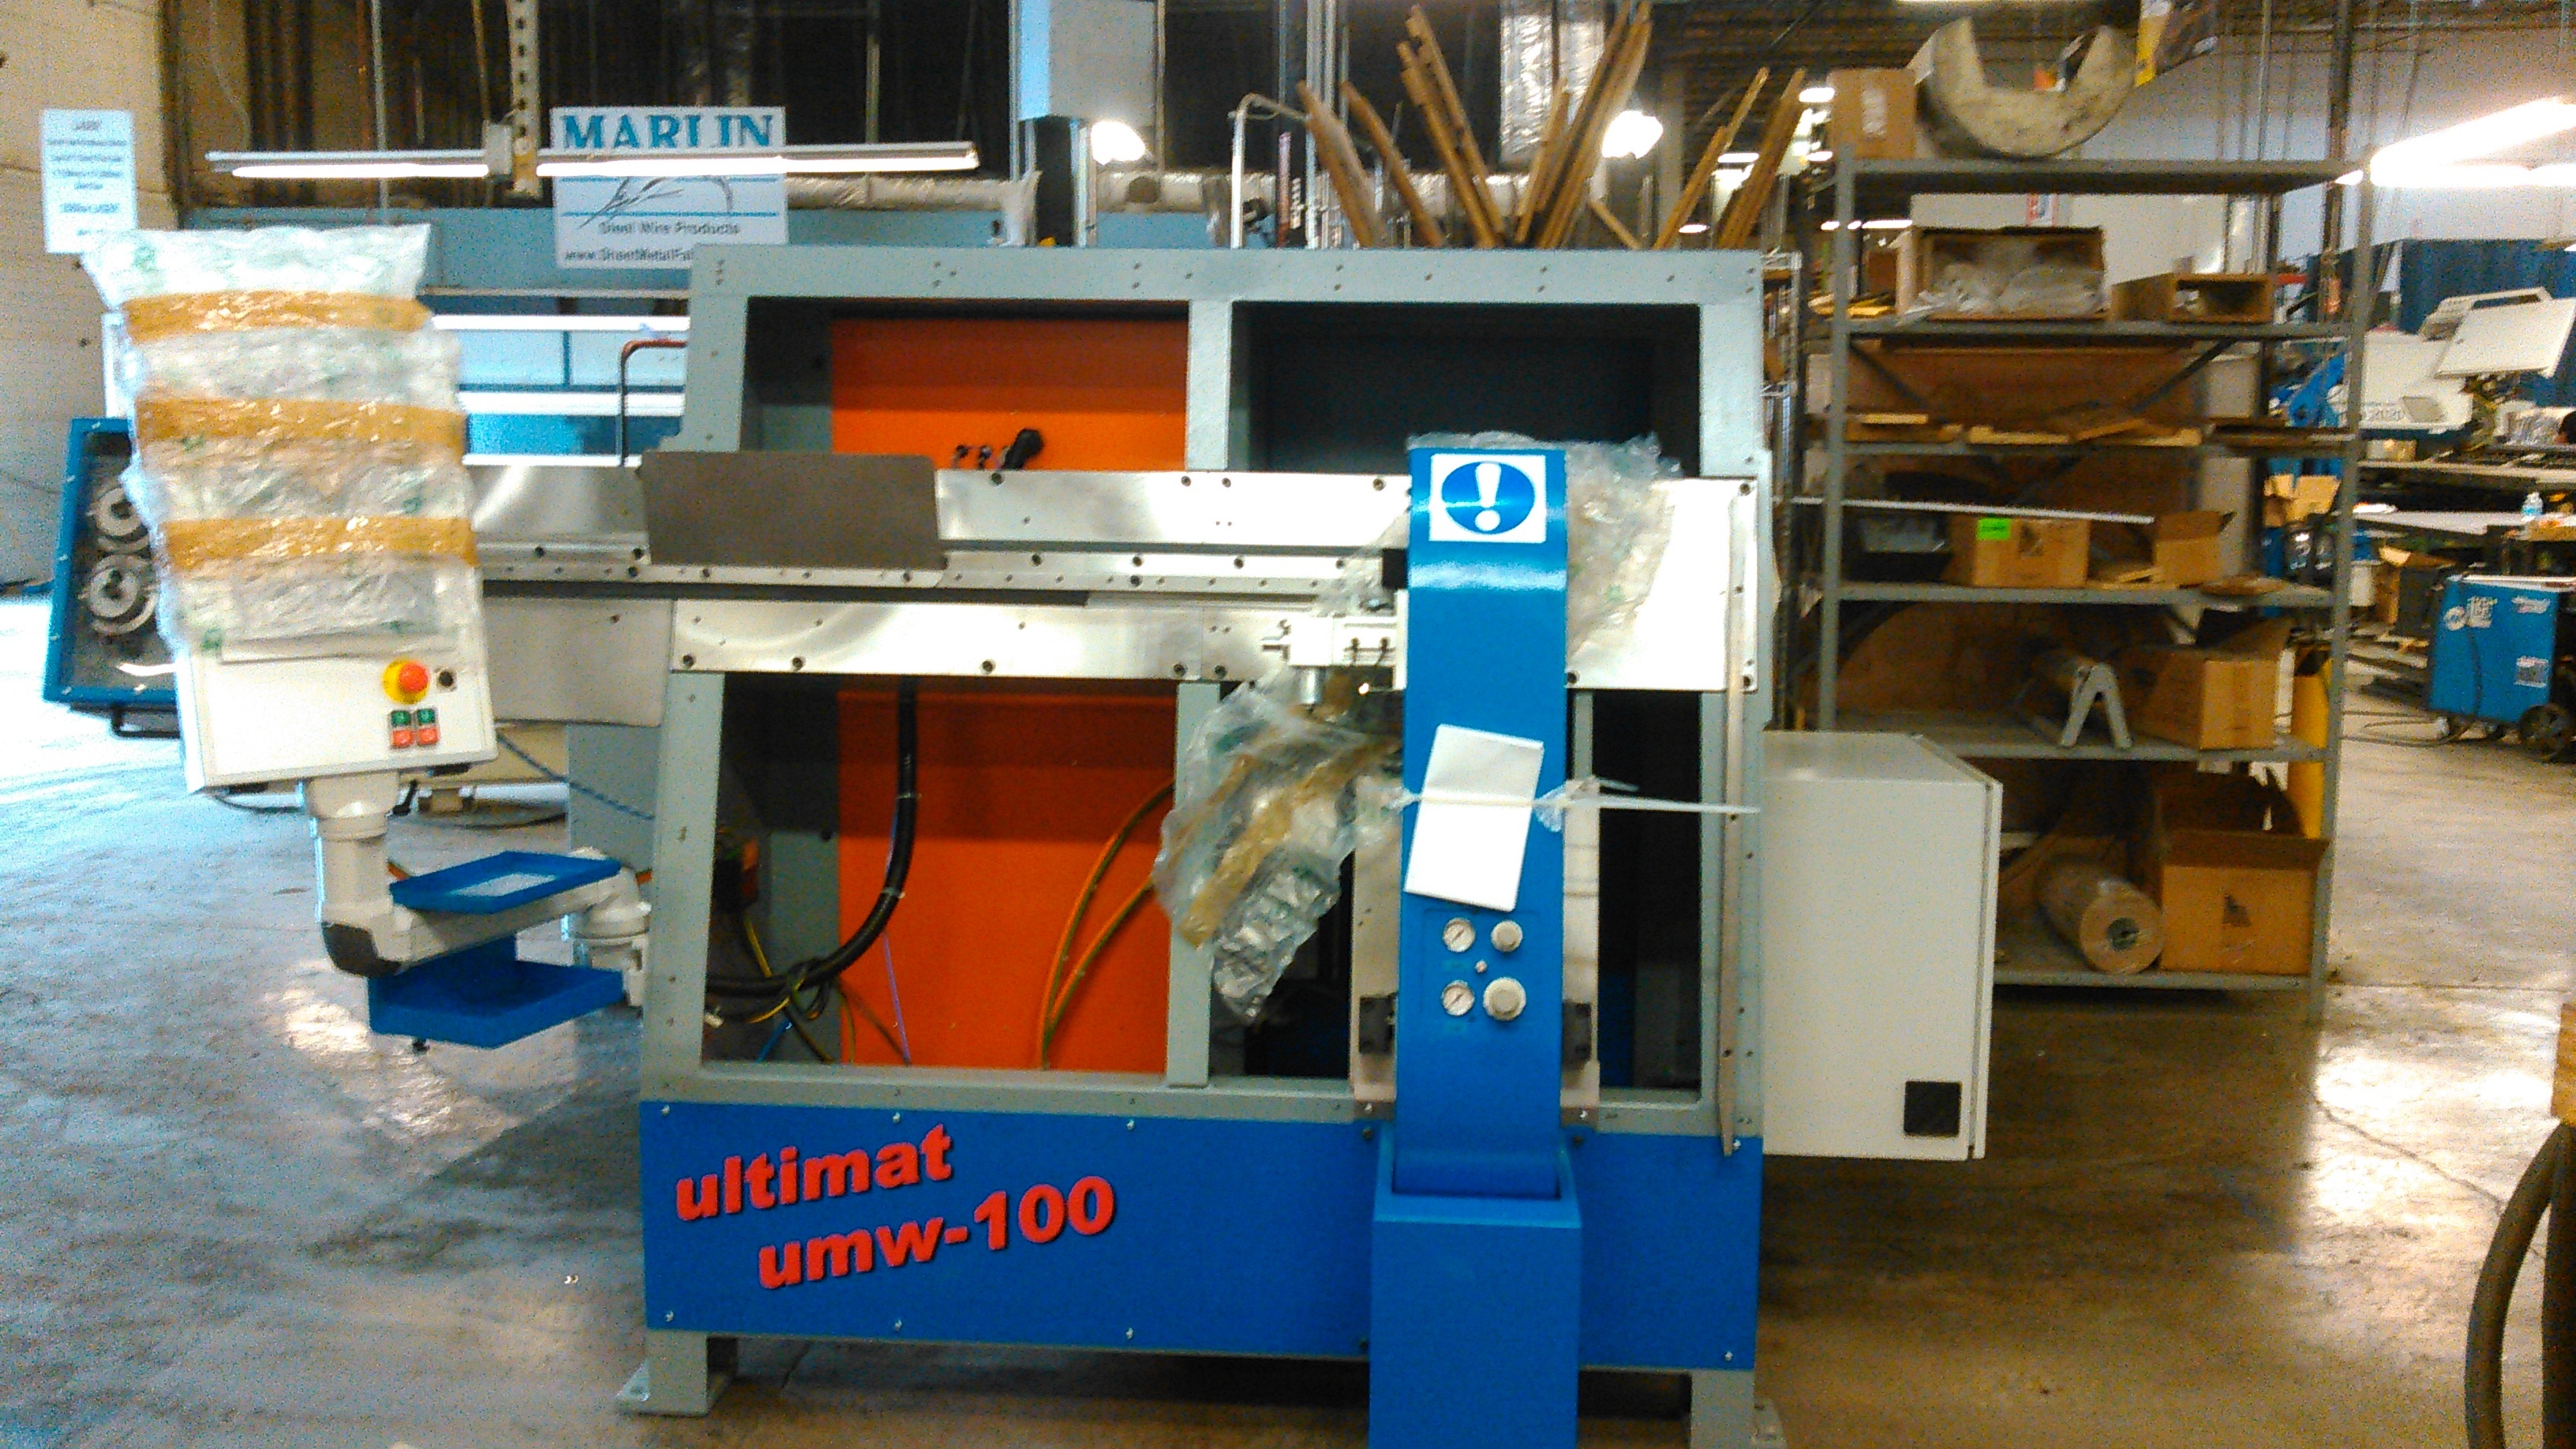 Machines such as Marlin's UMW-100 provides American manufacturers with a significant advantage over foreign companies that rely mostly on unskilled manual labor to create commodity metal forms.